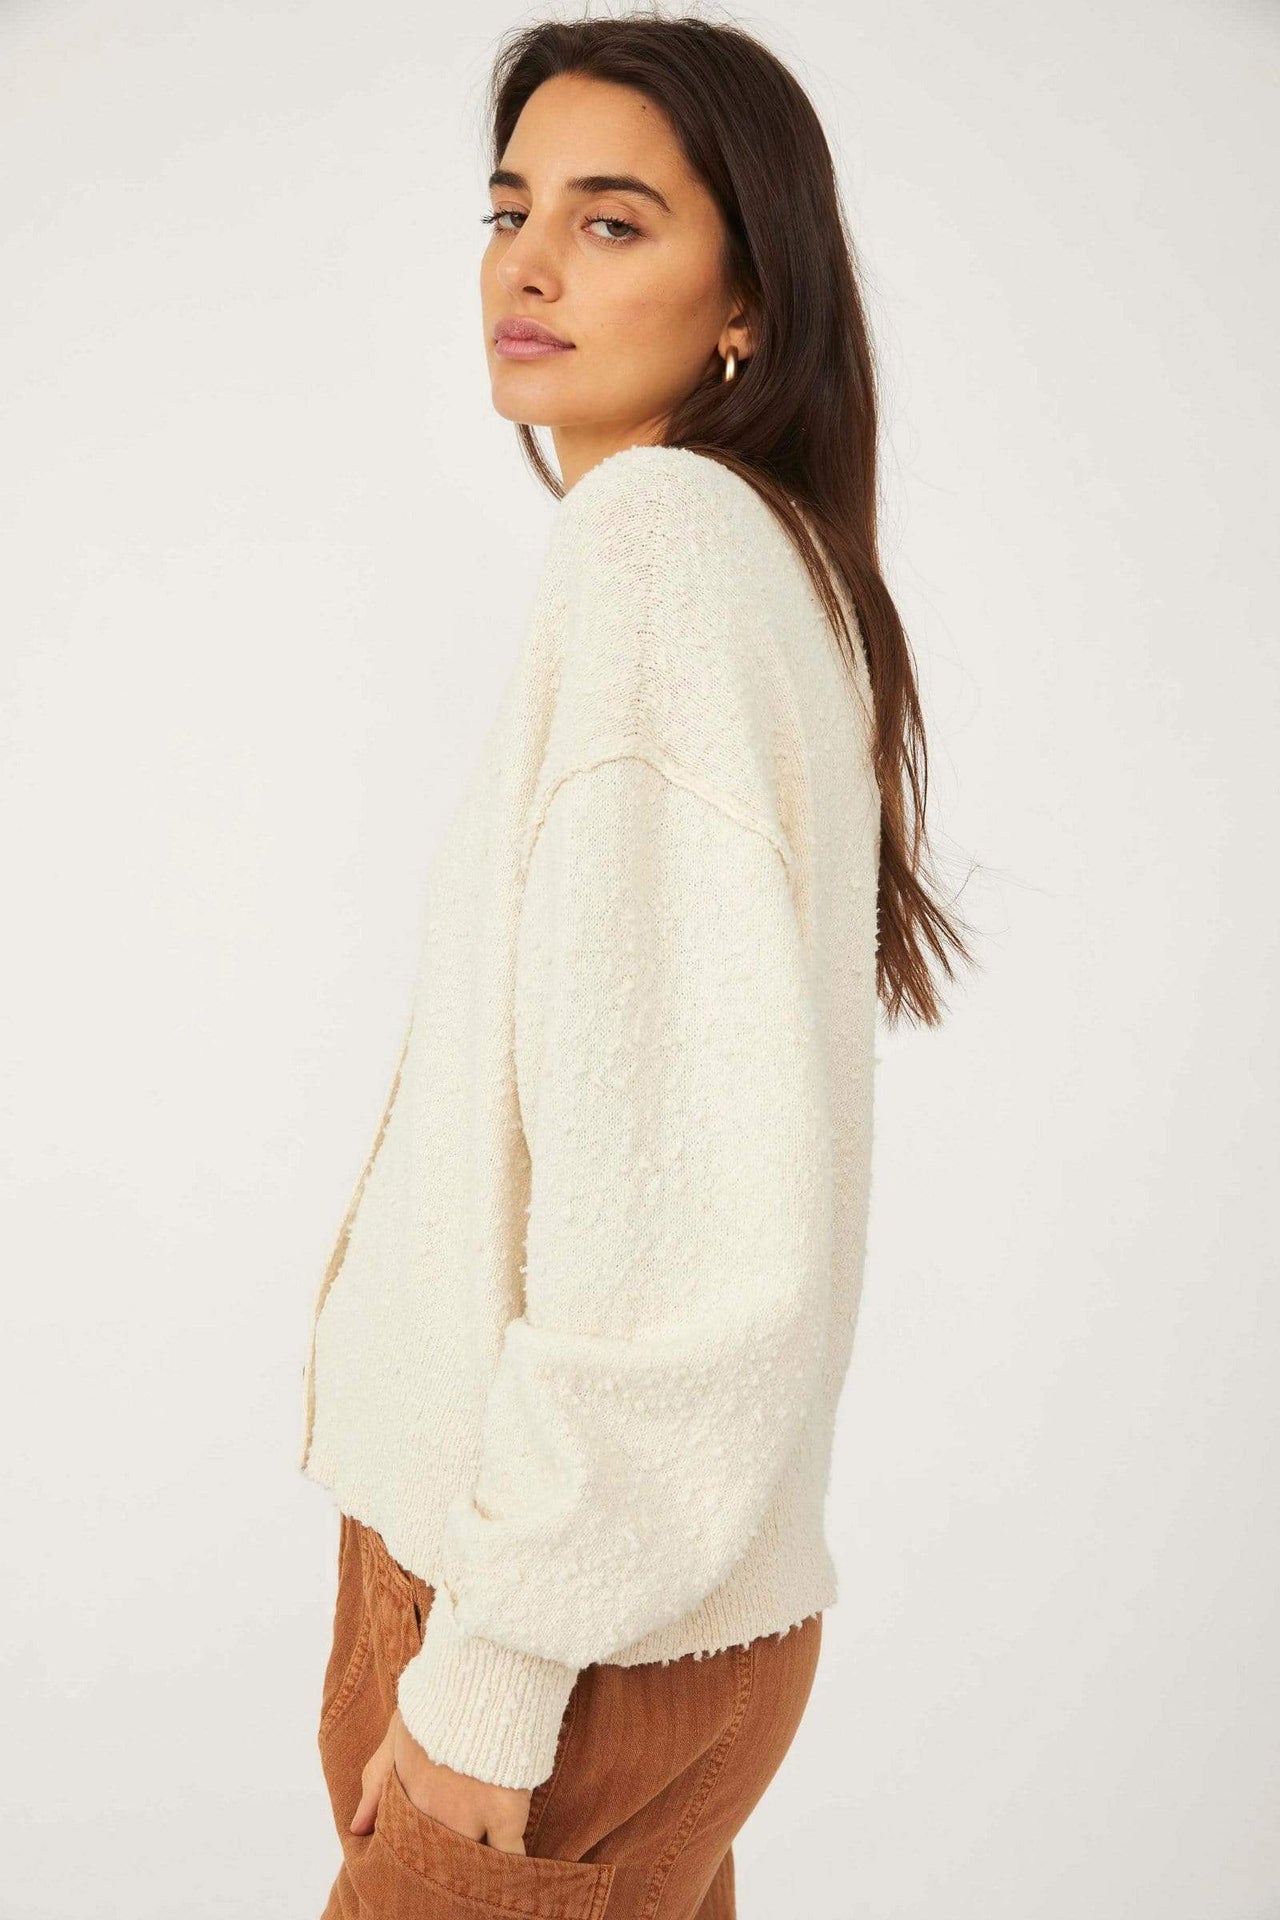 Found My Friend Cardi Cream, Sweater by Free People | LIT Boutique